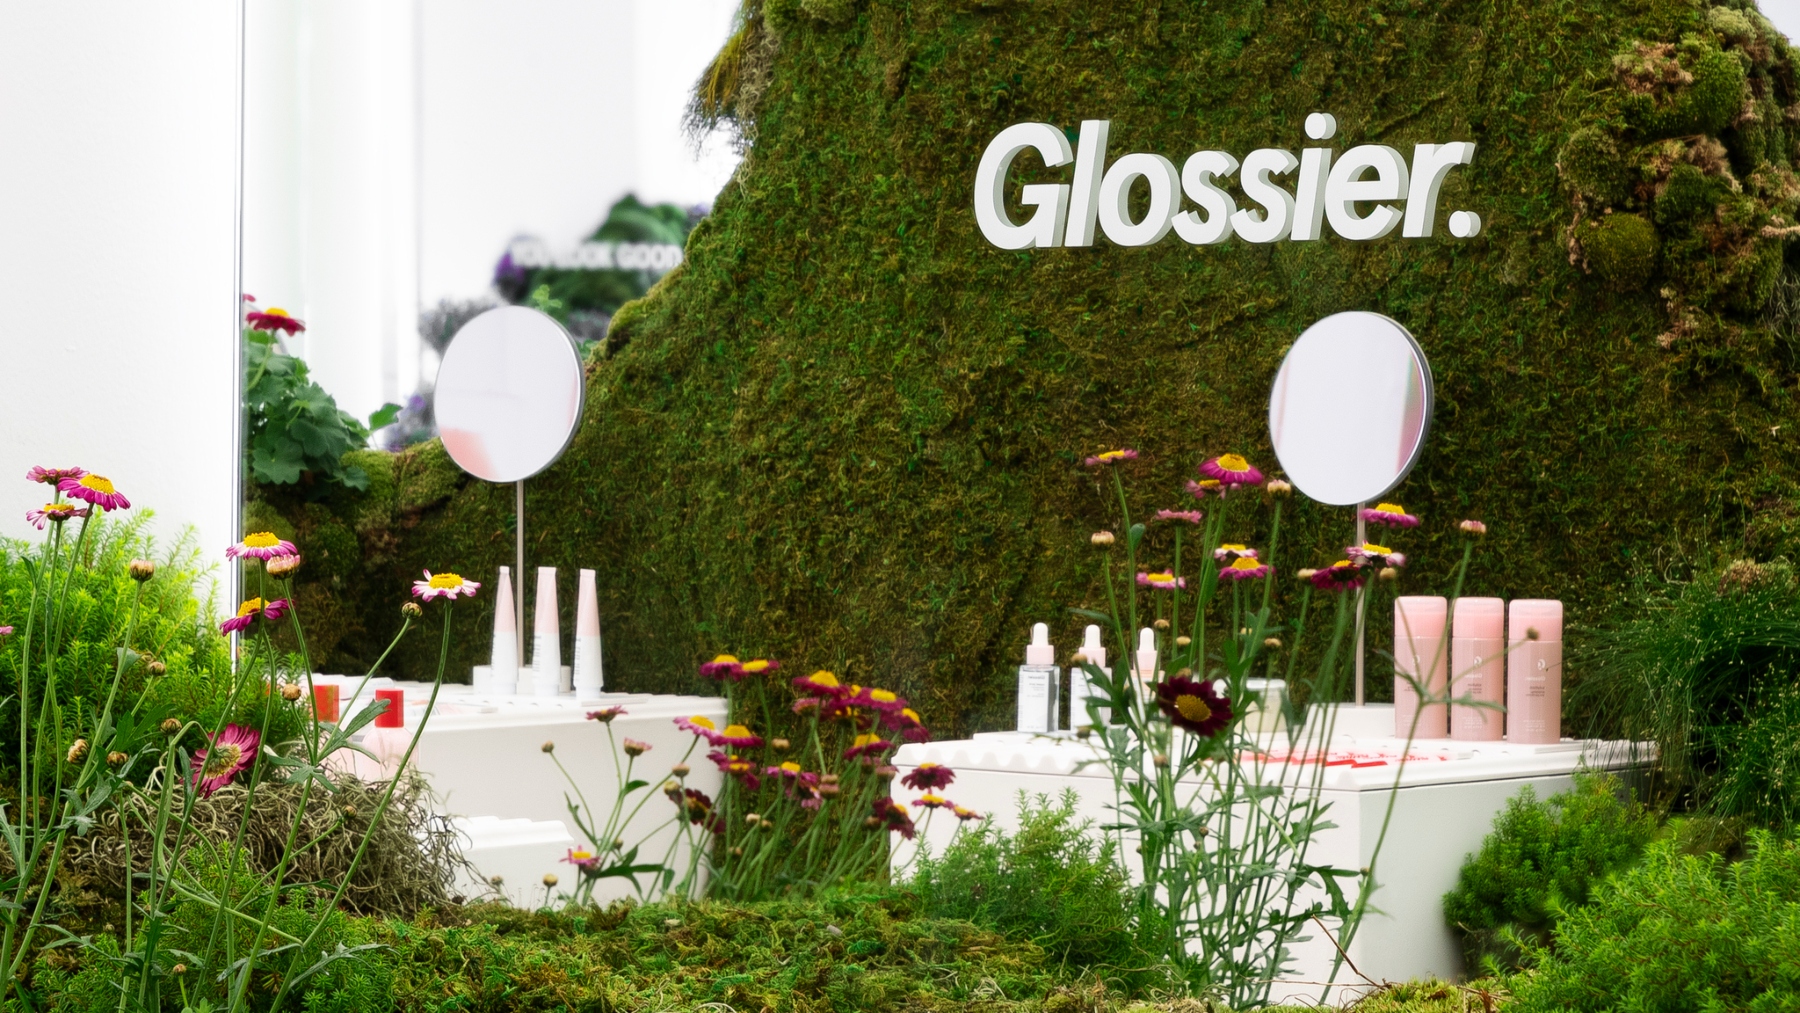 Glossier Products Are Officially at Sephora Stores